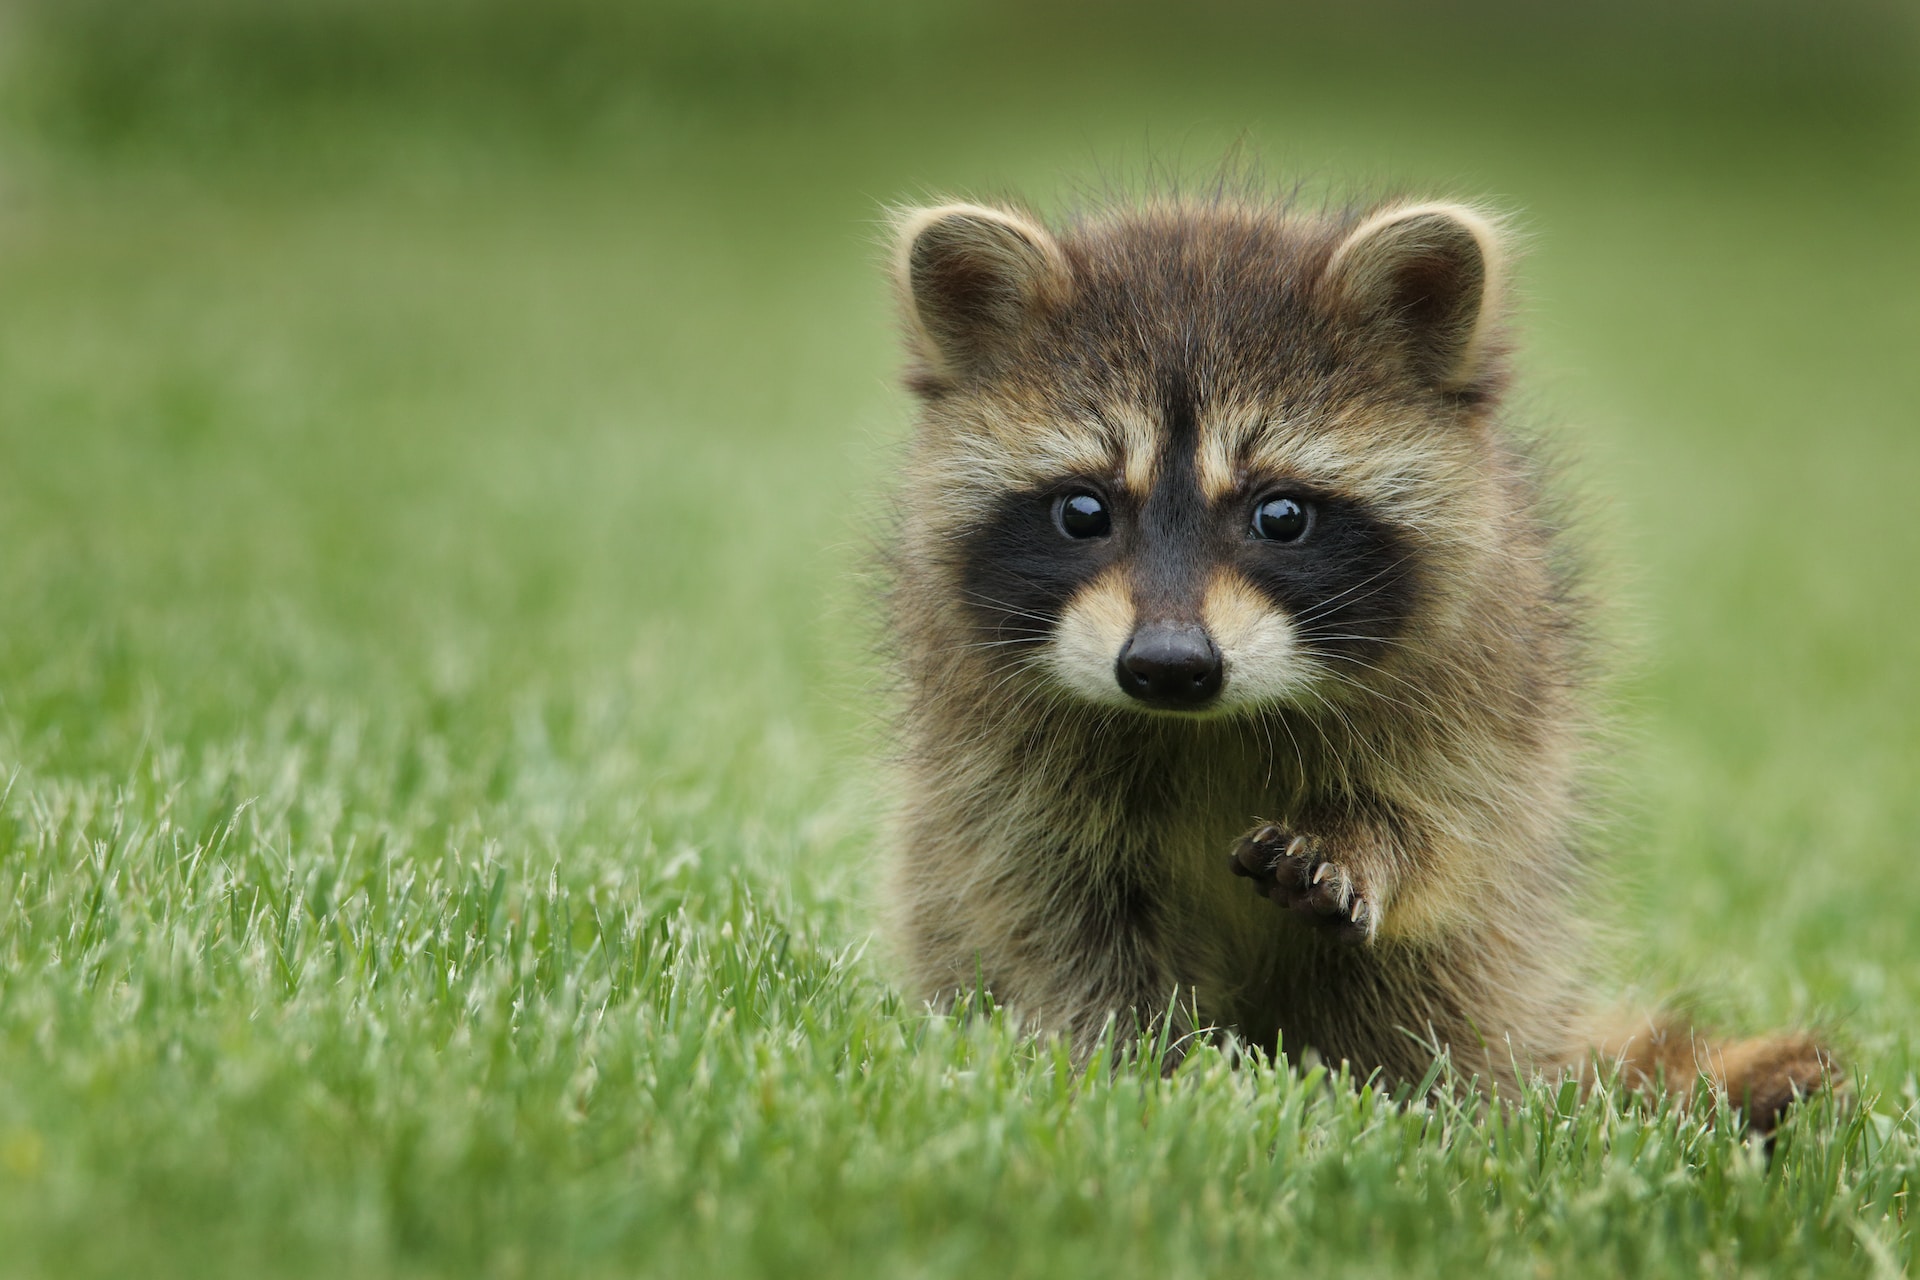 "A Racoon cub in the grass. "